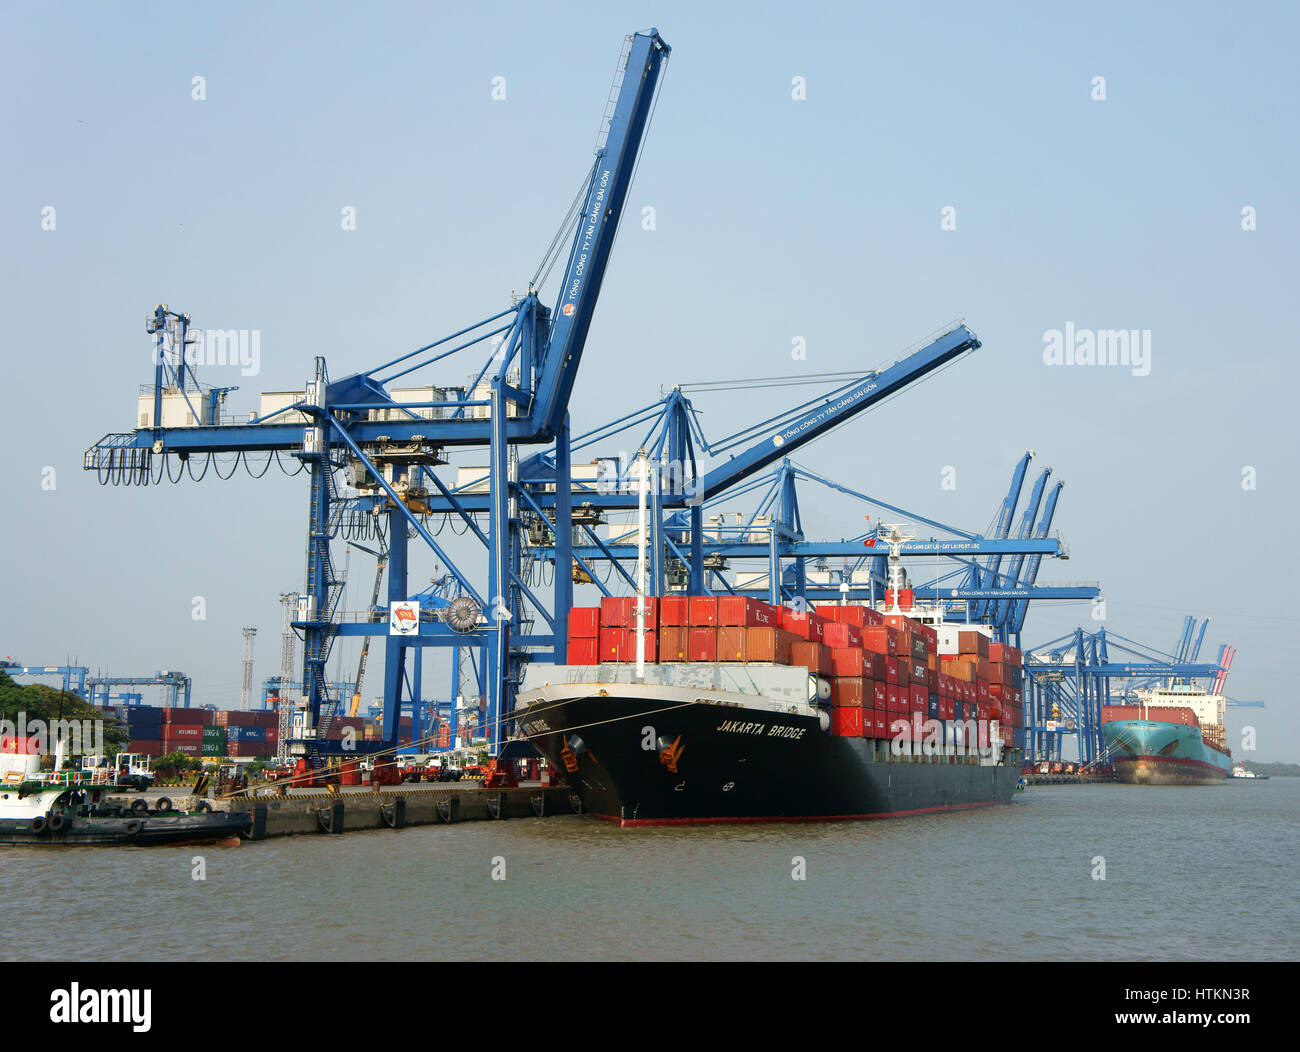 HO CHI MINH CITY, VIET NAM, Transportation for export, import at Cat Lai port, crane load container to boat, big industry service for trade, Vietnam Stock Photo